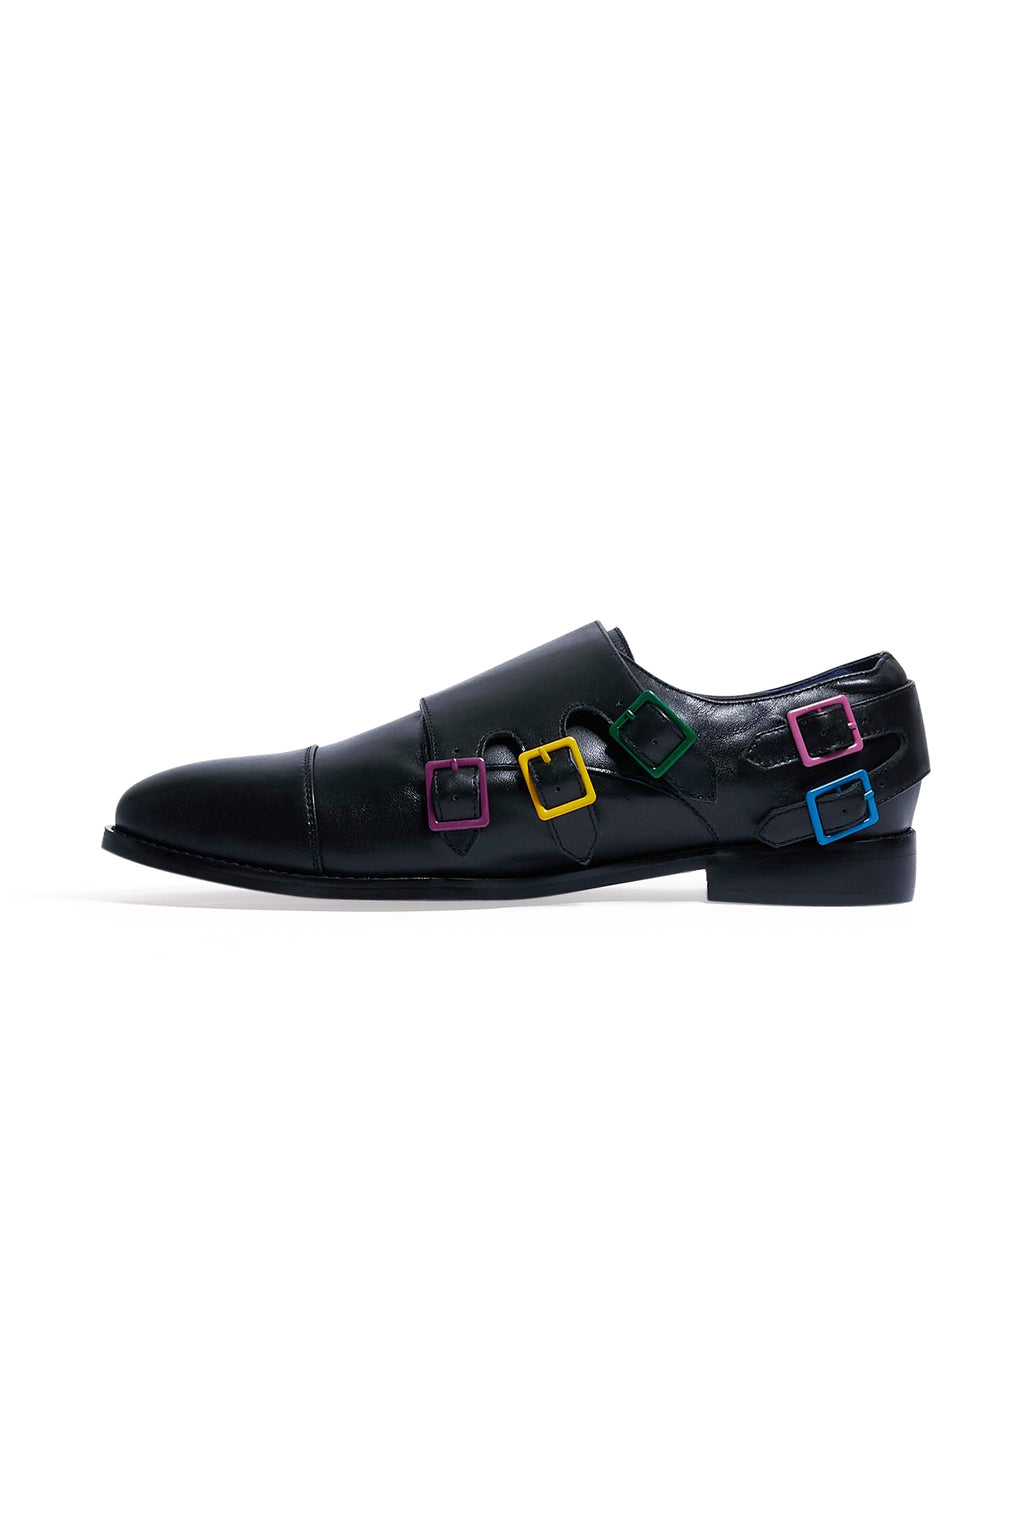 Adrian Mens Leather Buckled Shoes